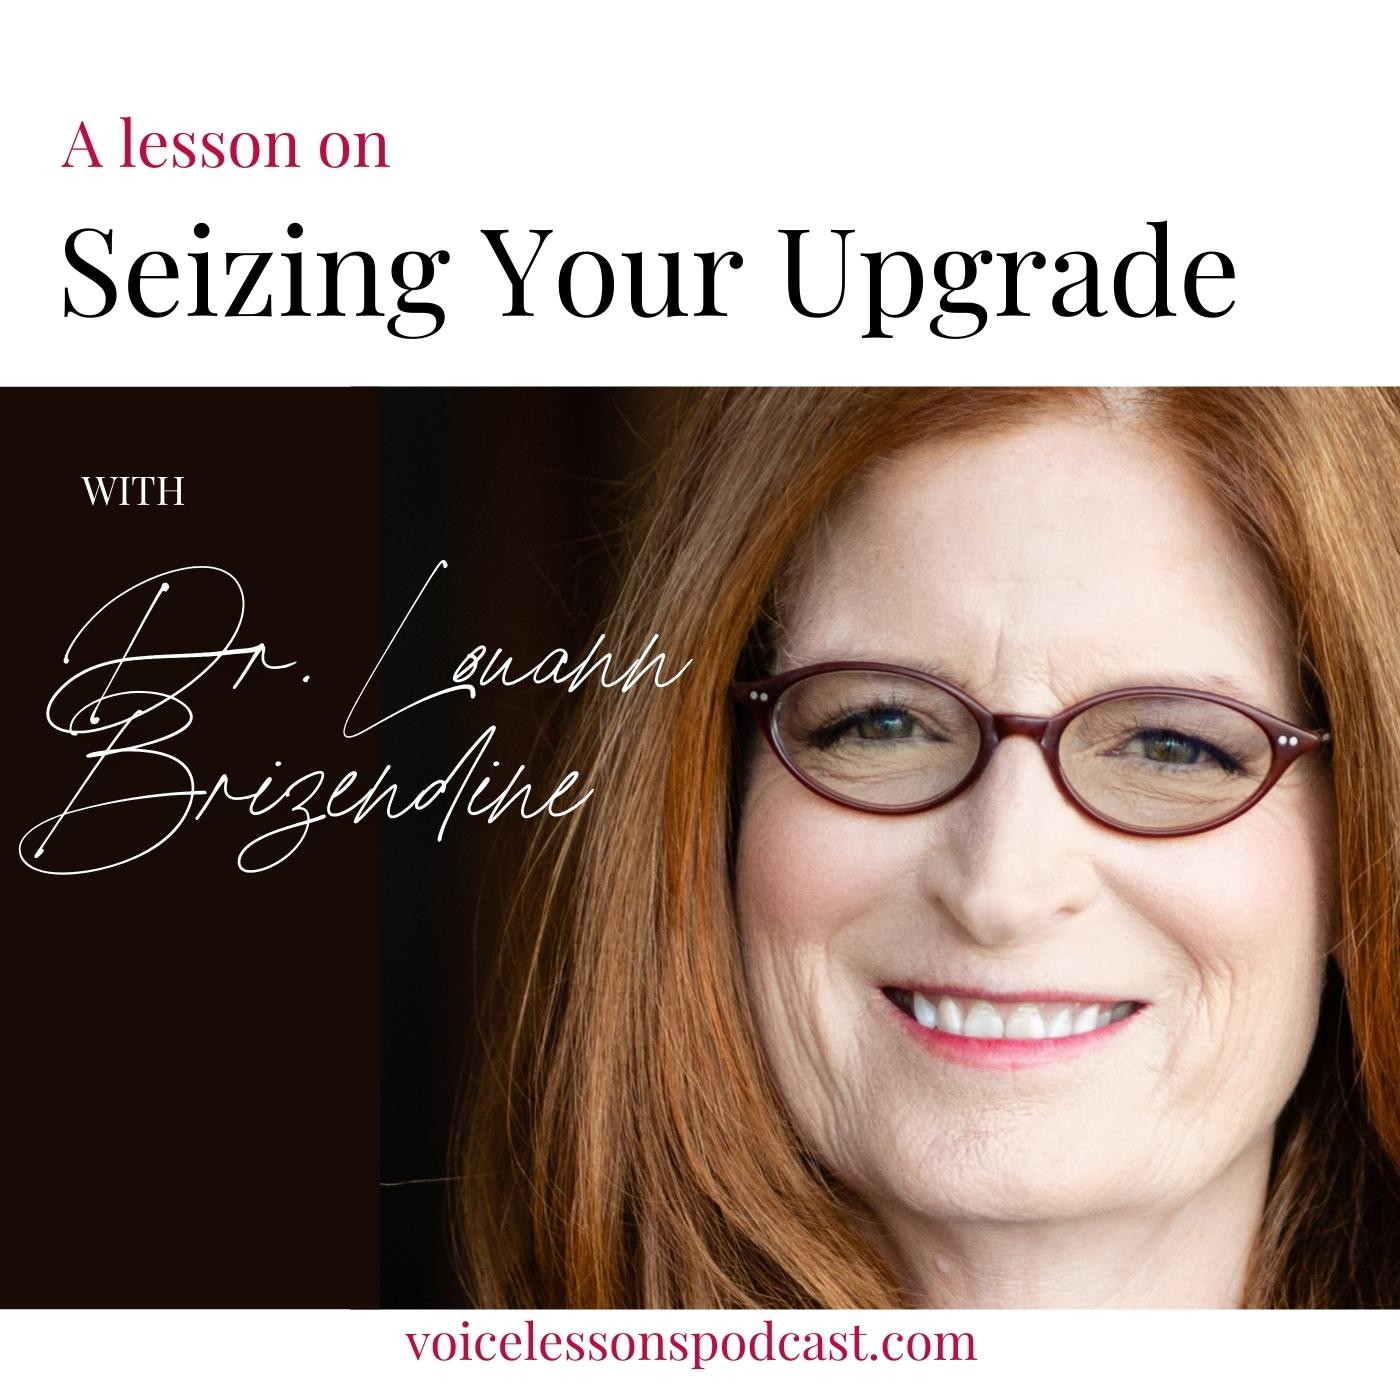 A_Voice_Lesson_On_Seizing_Your_Upgrade_with_Louann_Brizendine